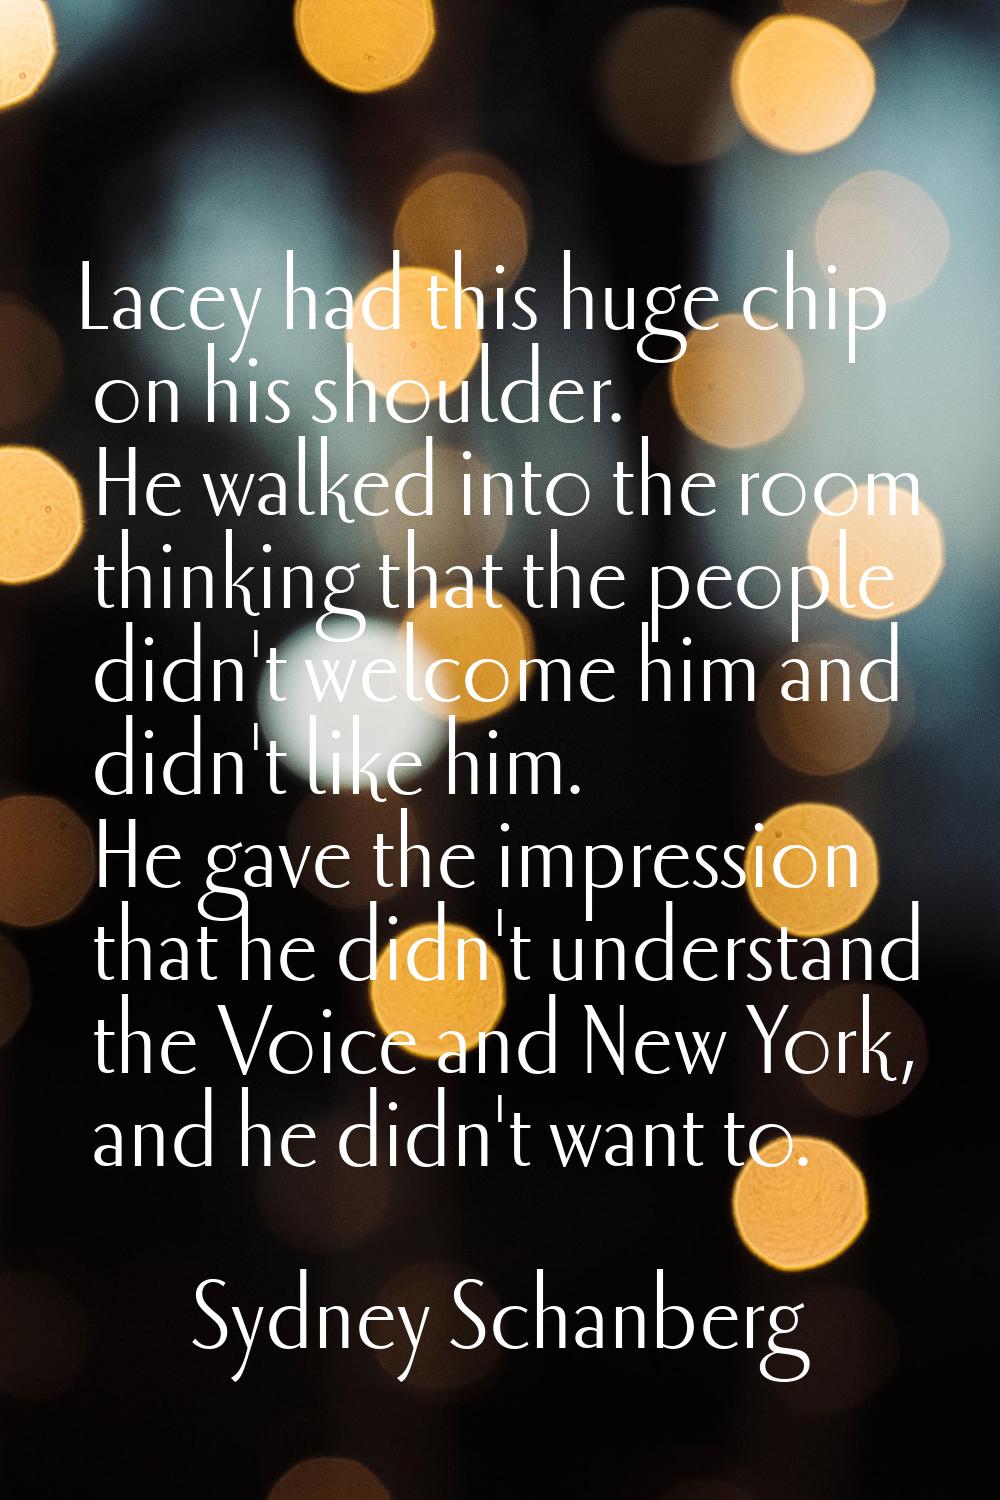 Lacey had this huge chip on his shoulder. He walked into the room thinking that the people didn't w